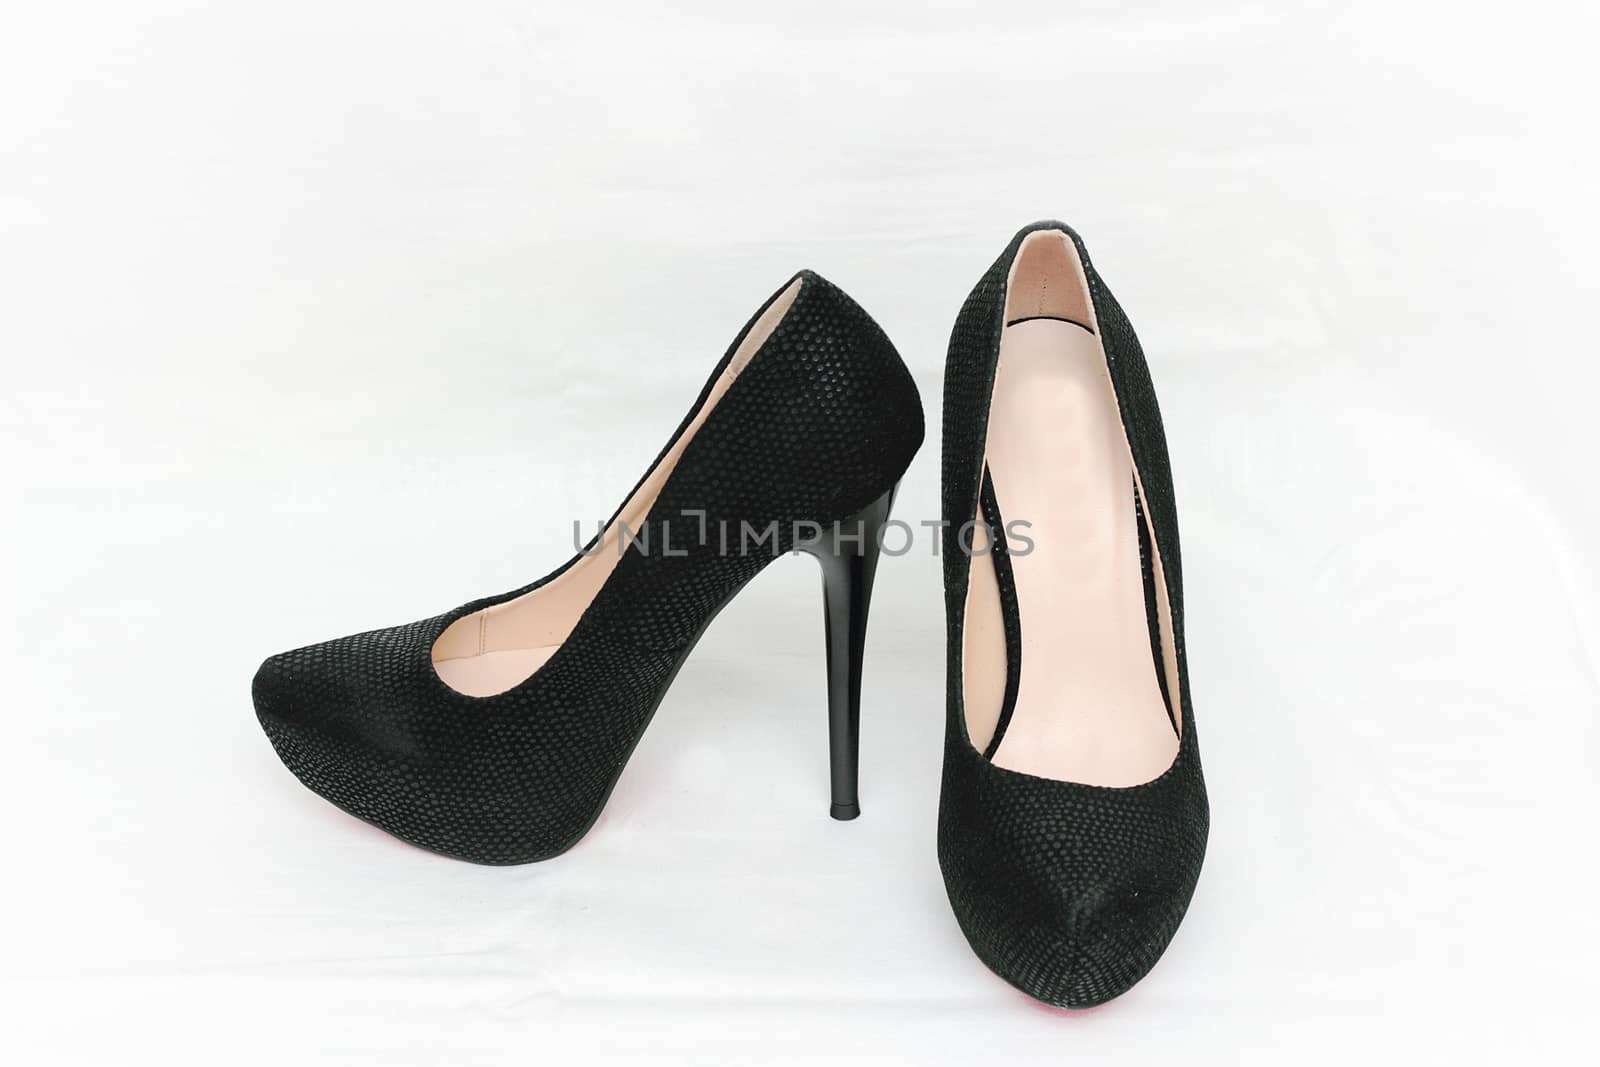 Female shoes with heels of black color isolated against white background.